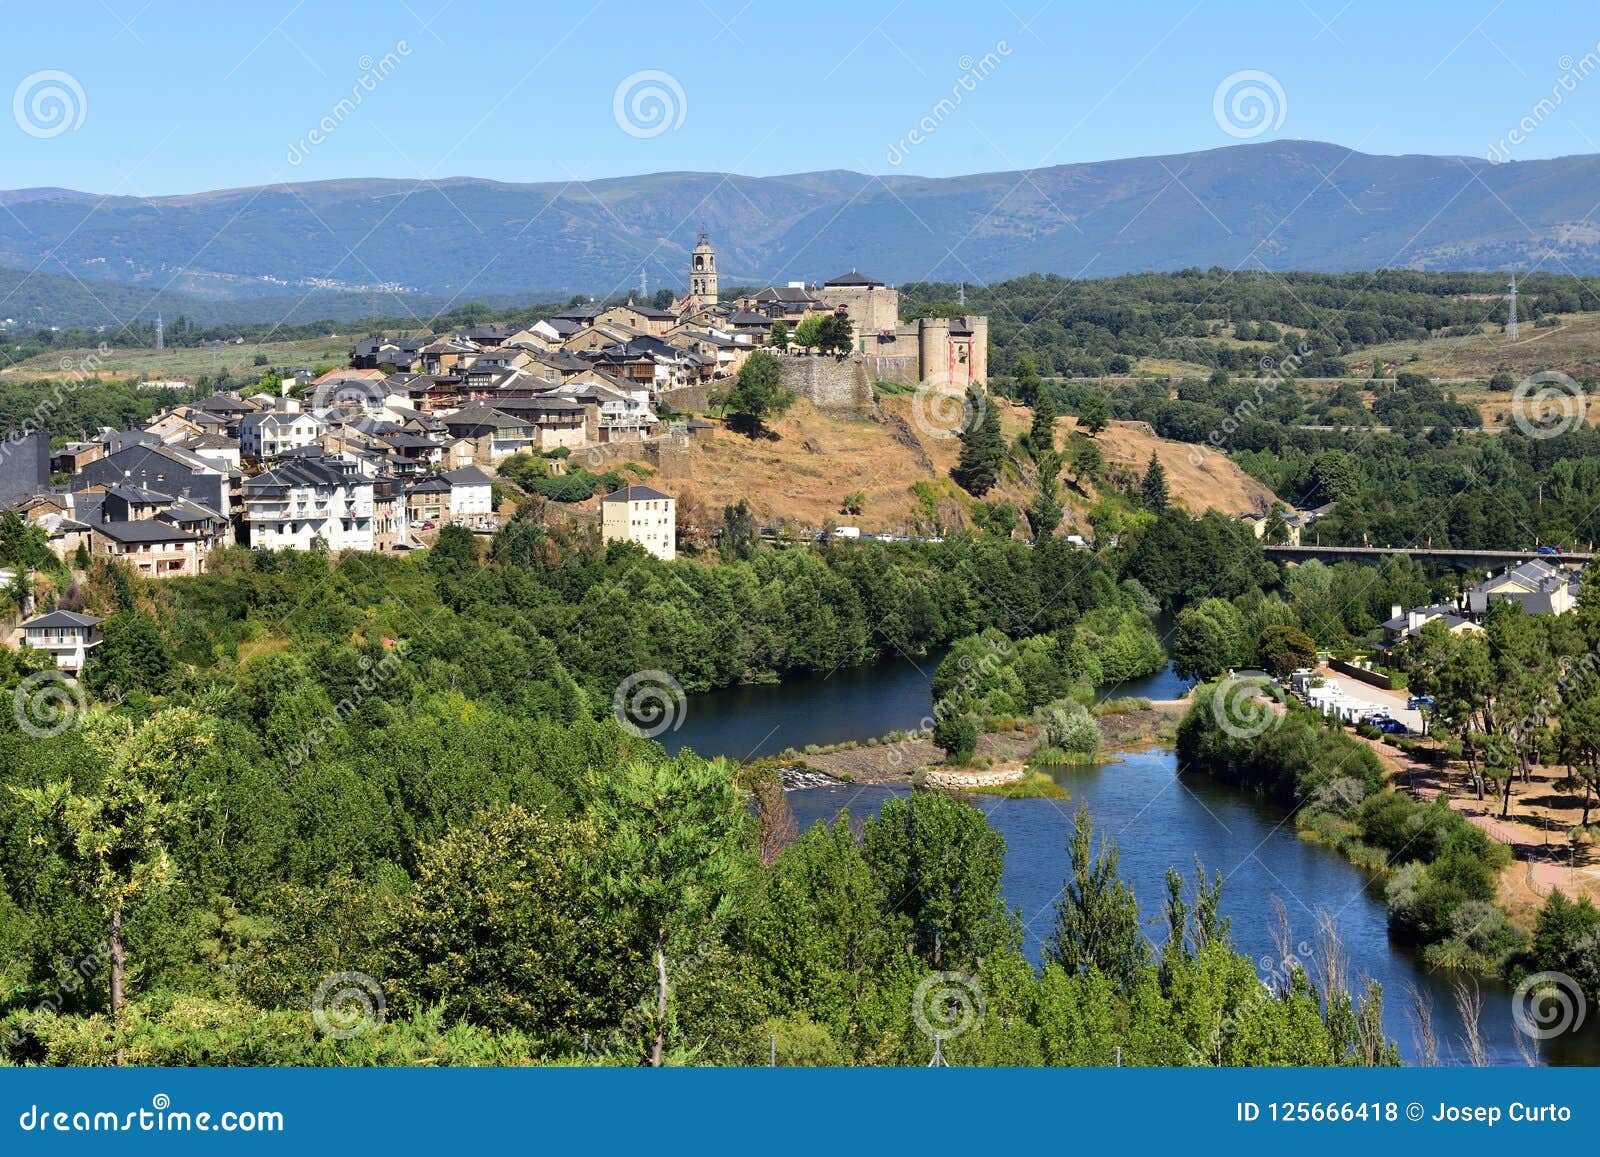 elevated view of the medieval town of puebla de sanabria and the